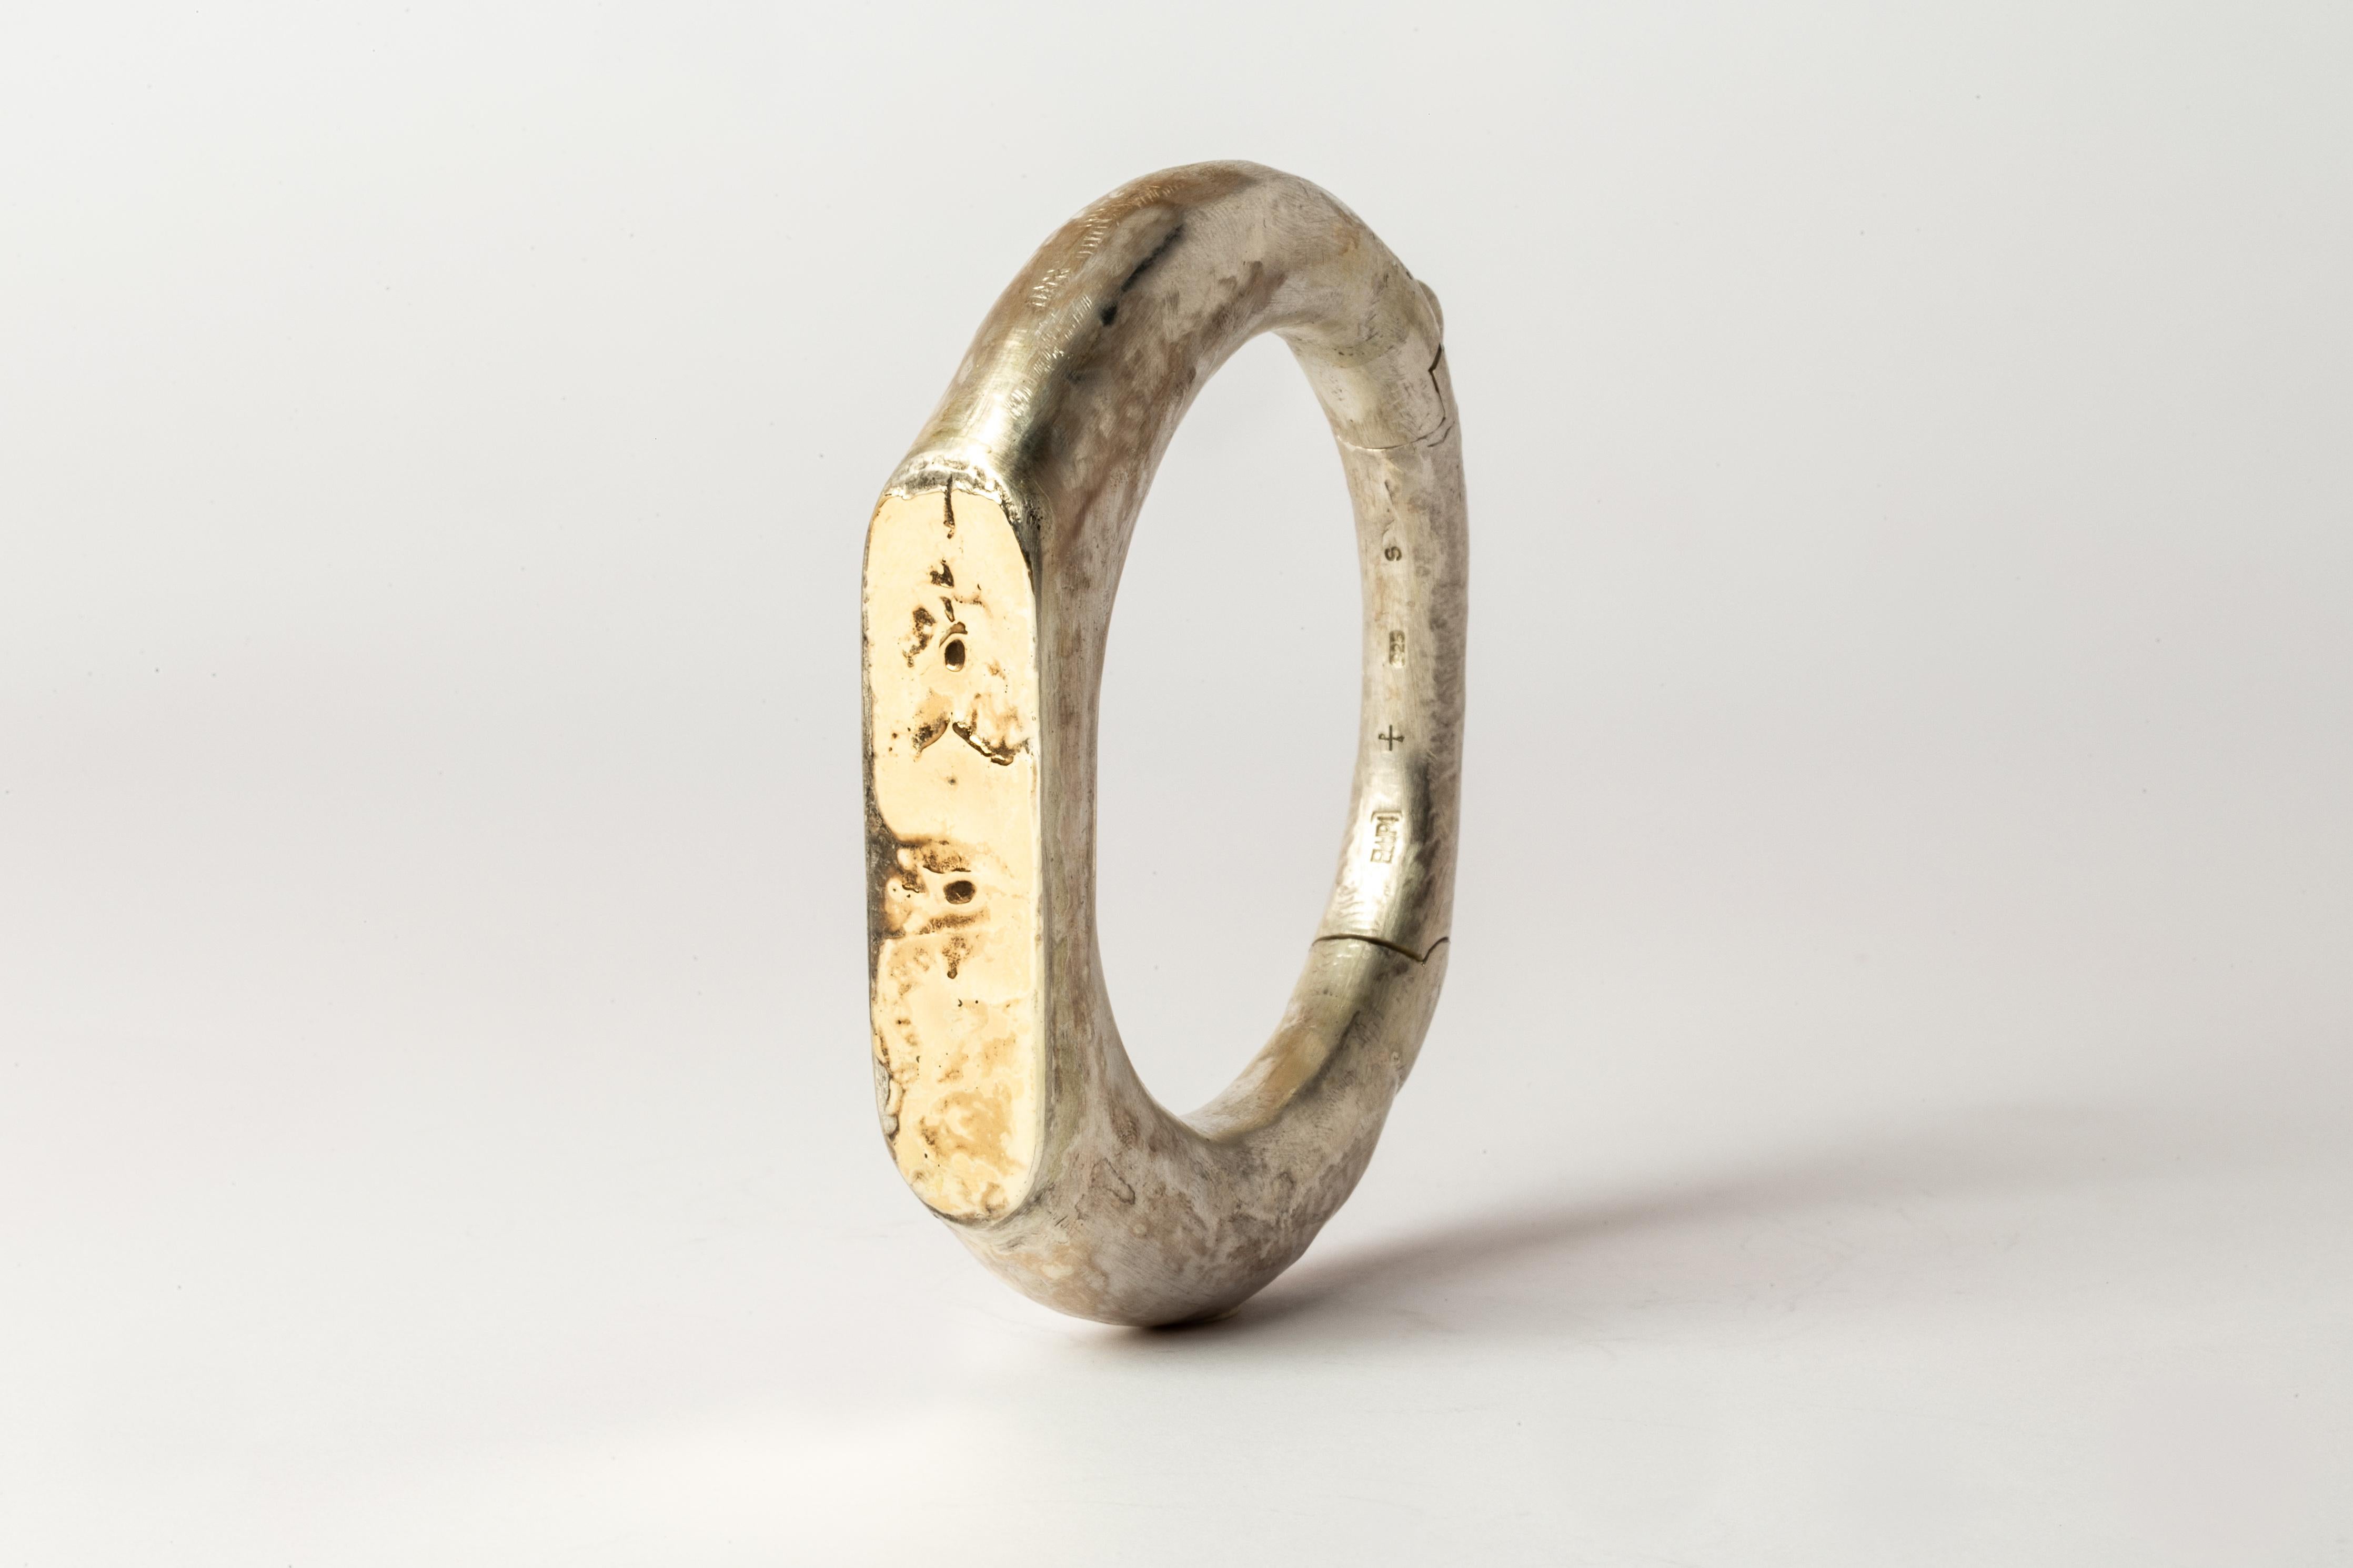 Bracelet in mate sterling silver with fused layer of 18K yellow gold. This item is made with a naturally occurring element and will vary from the photograph you see. Each piece is unique and this is what makes it special. This piece is 100% hand